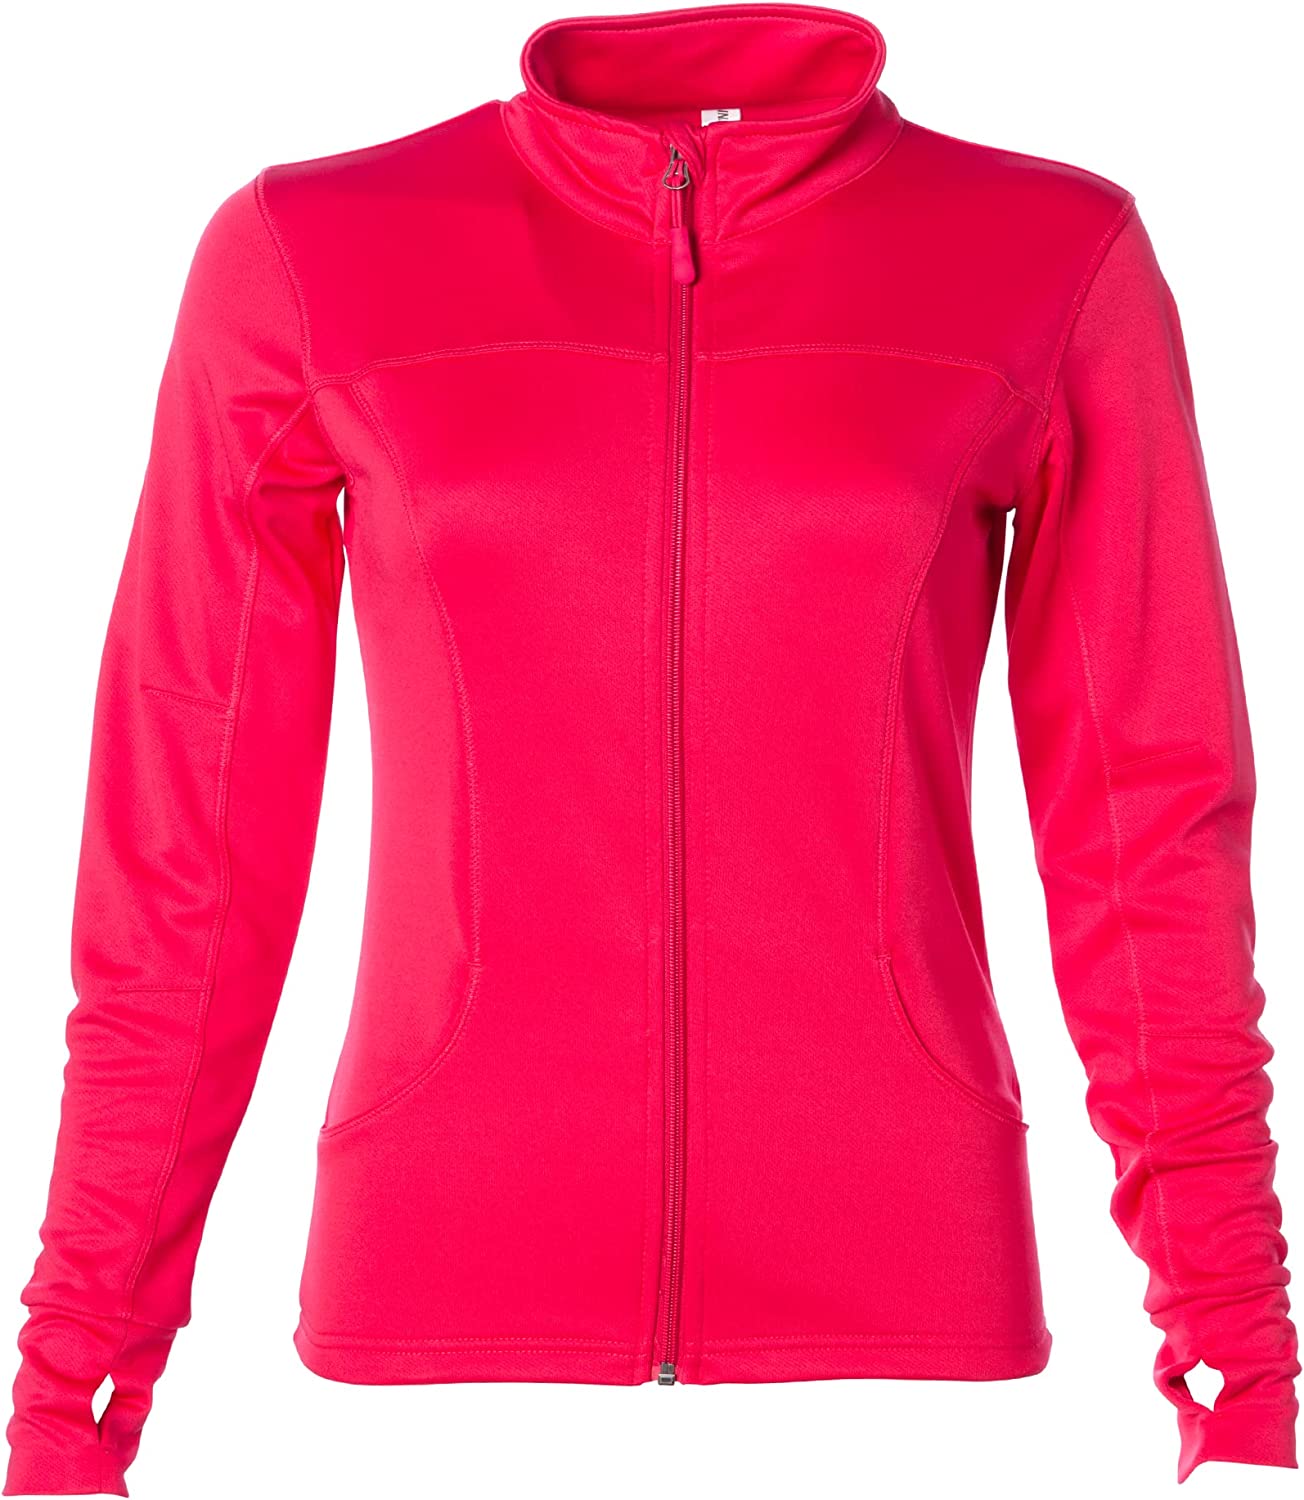 Global Blank Athletic Workout Jackets For Women, Full Zip-Up